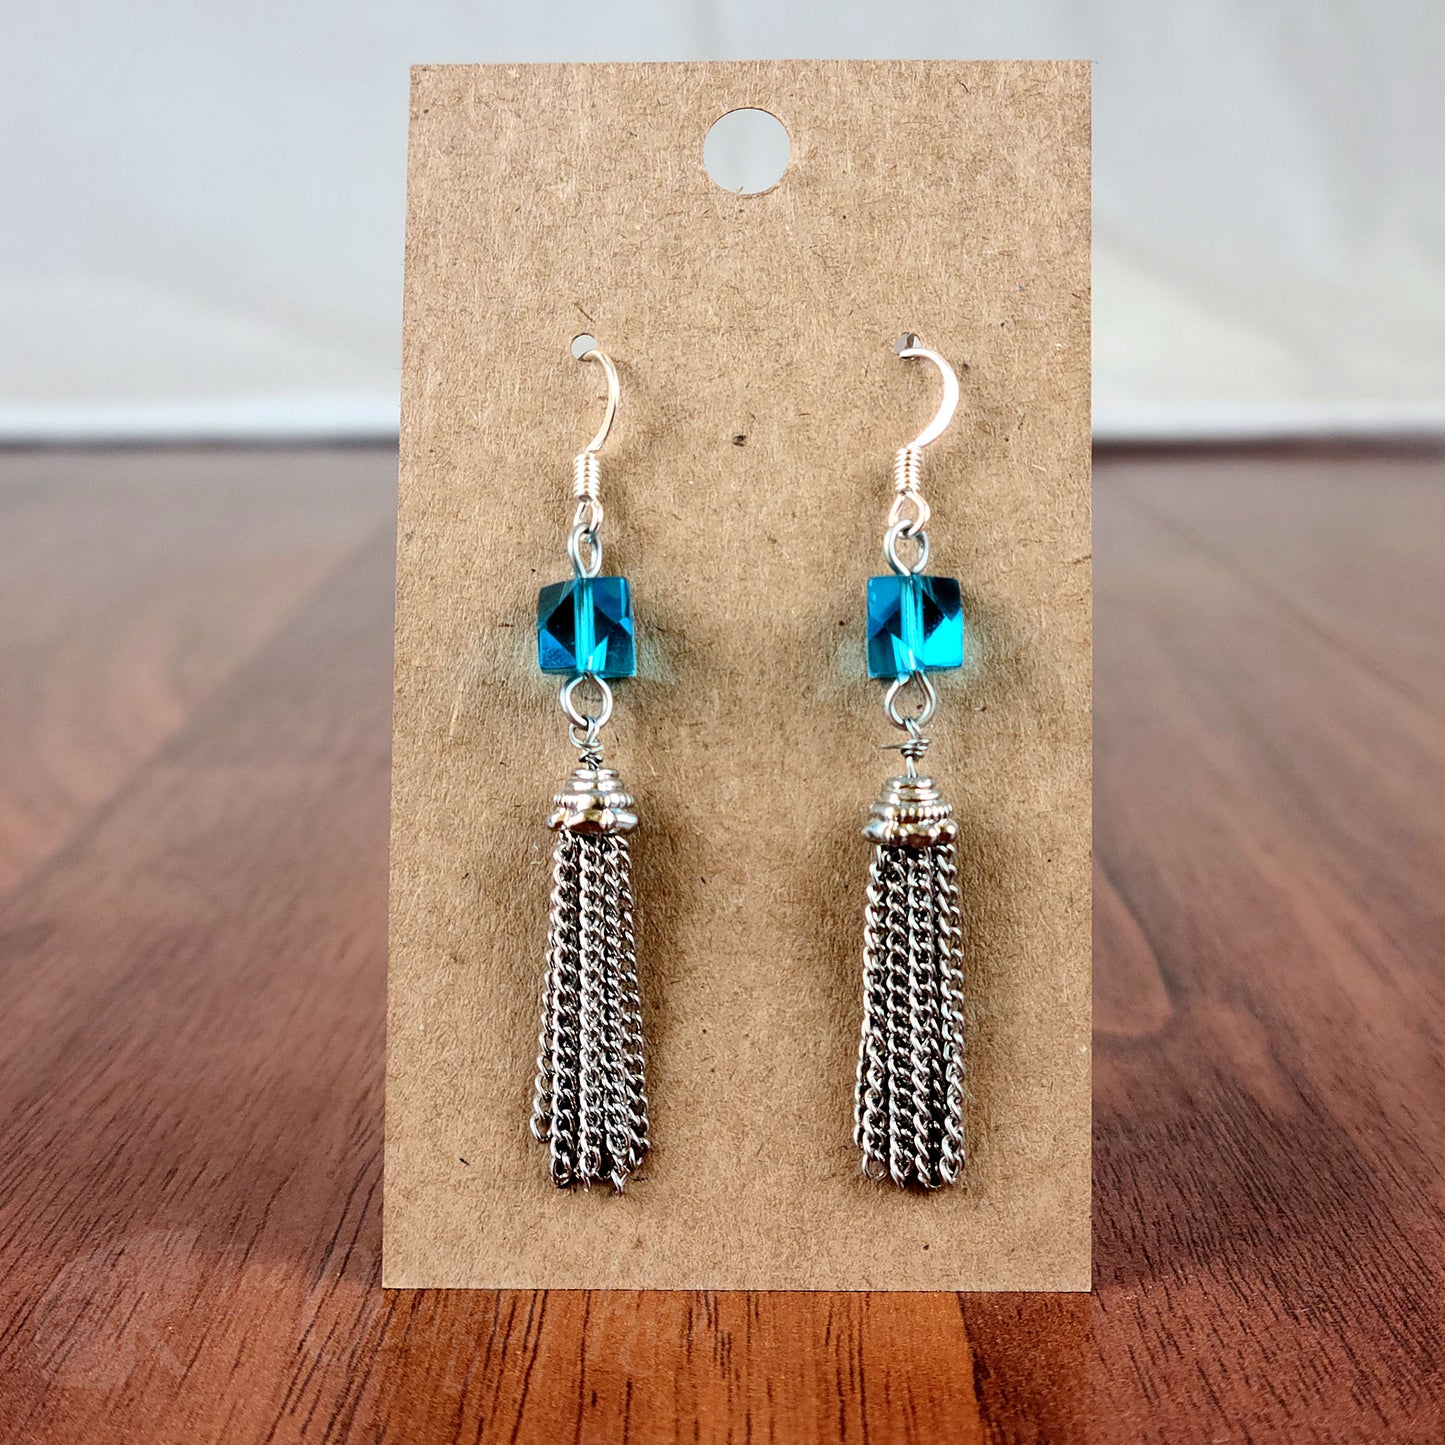 Drop earring featuring a cyan angle-cut cube crystal bead and silver chain tassle and fittings